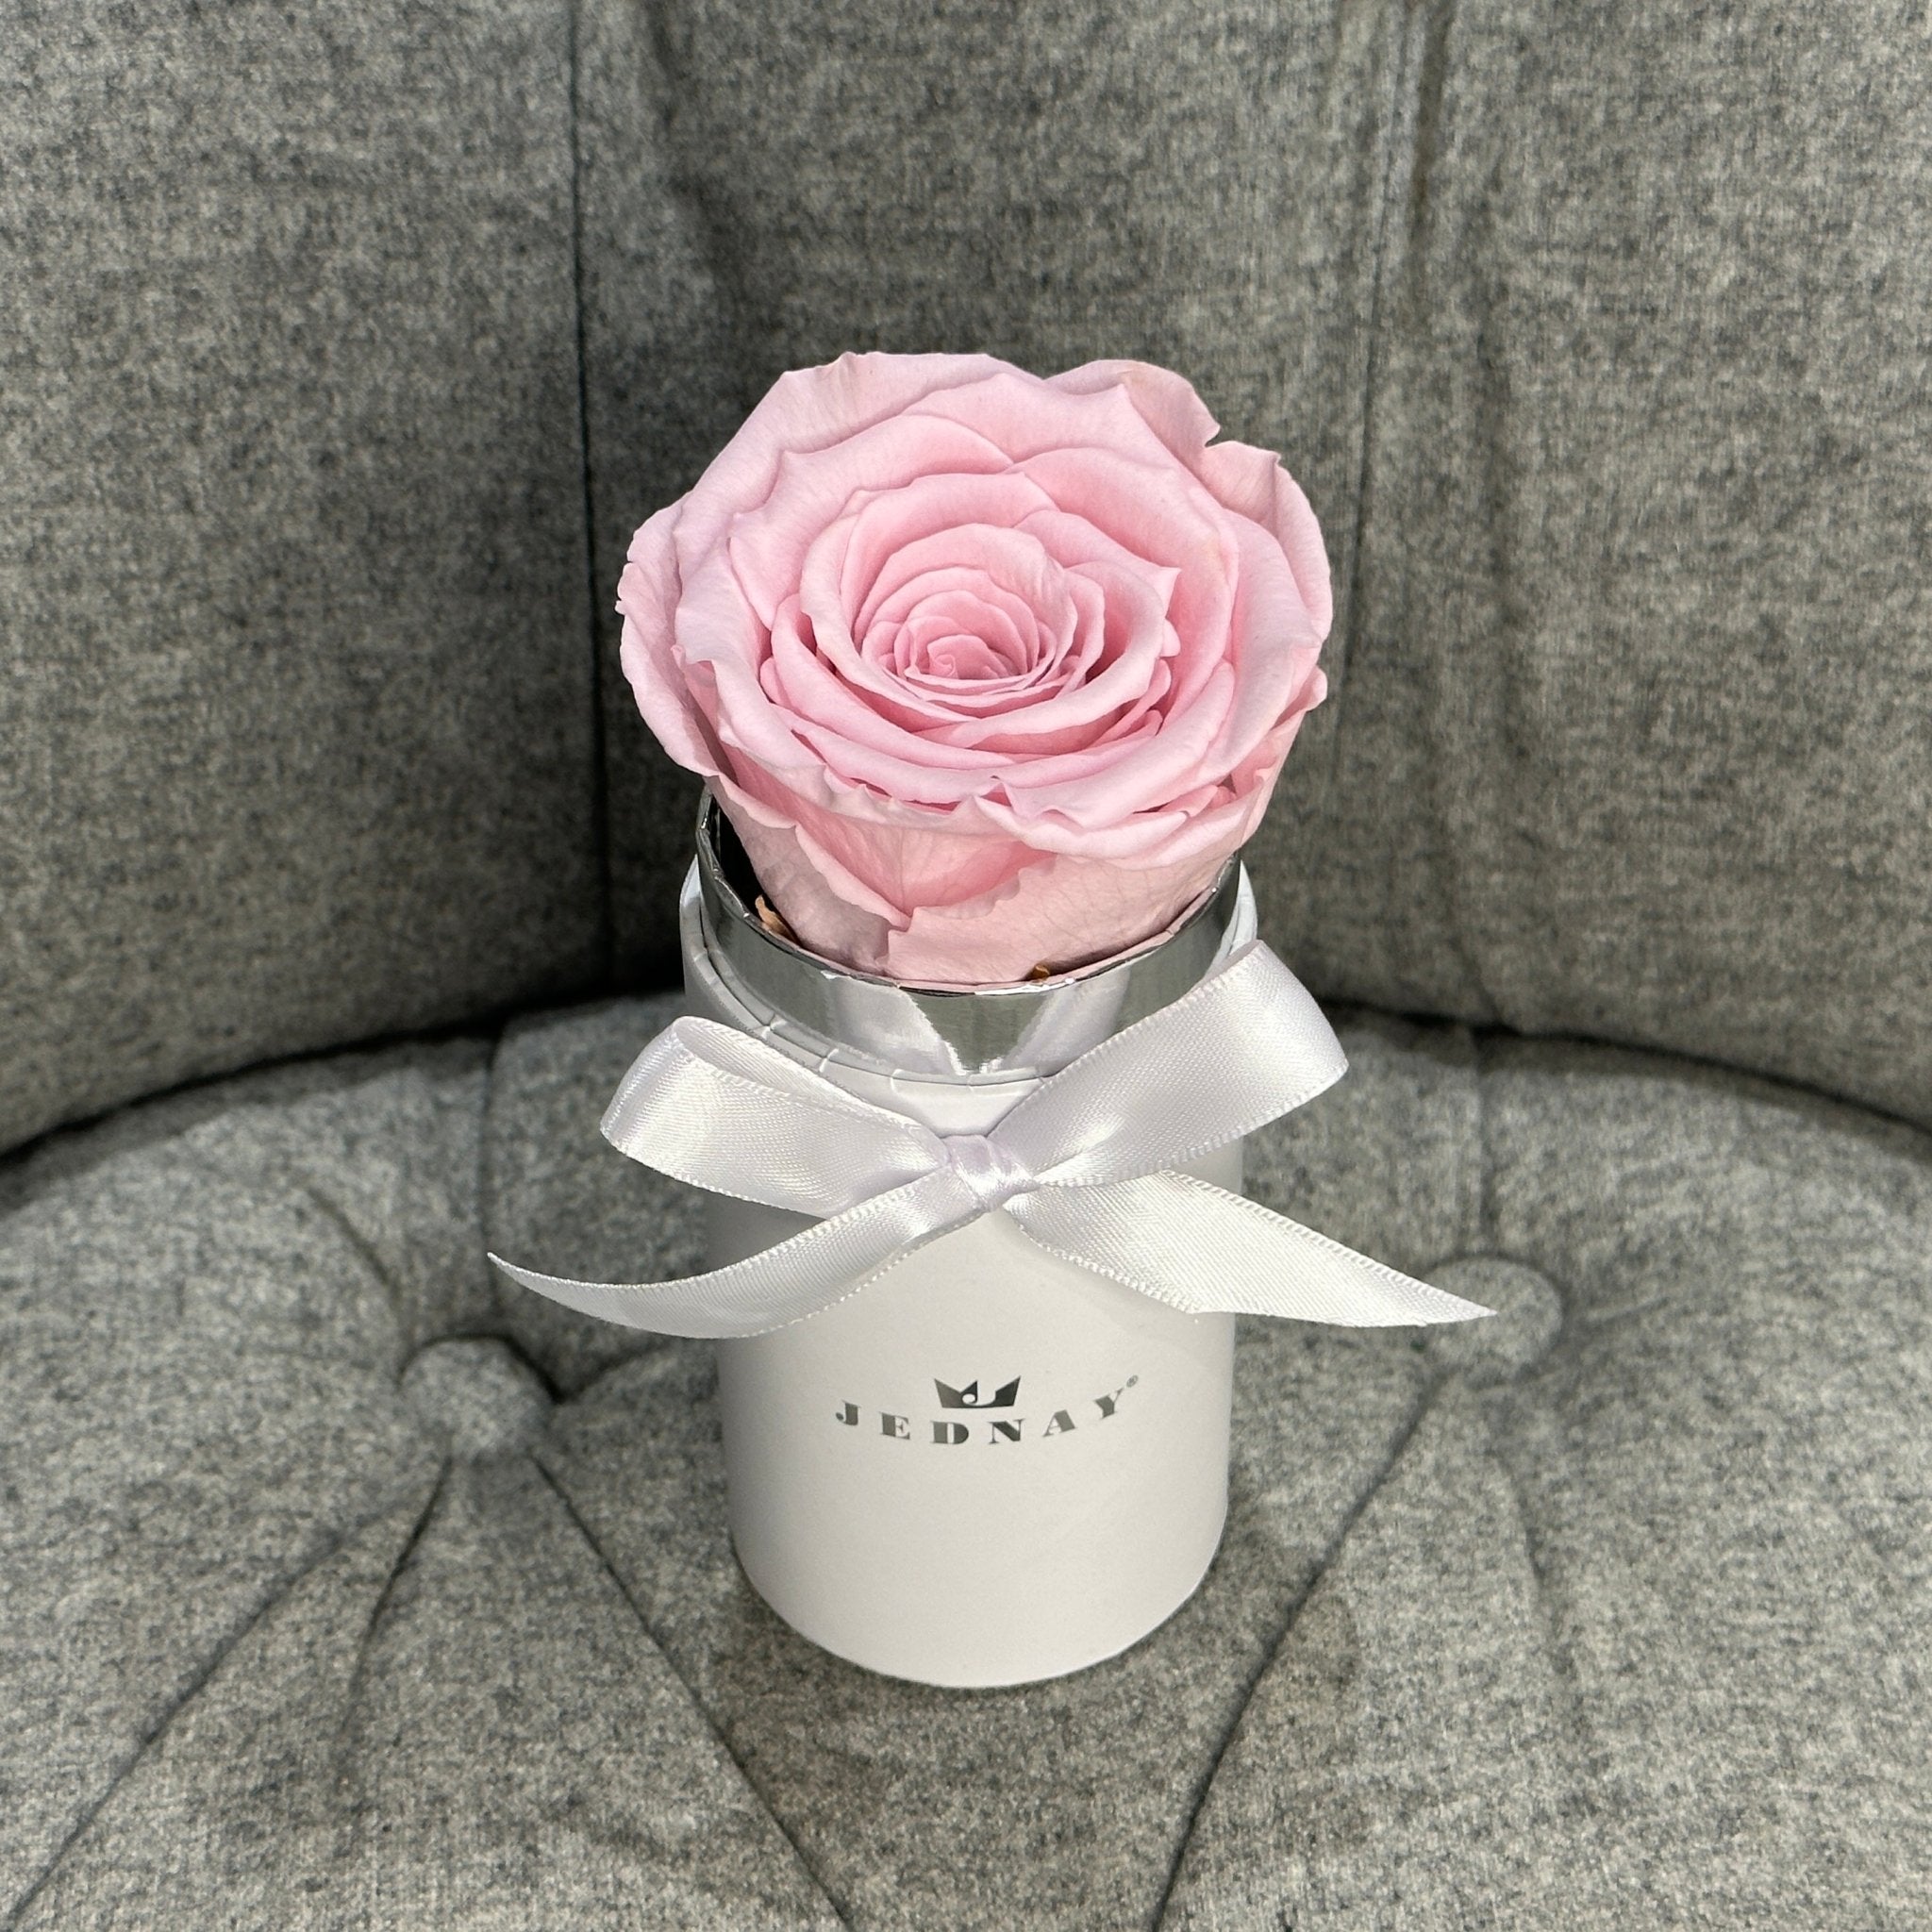 The Uno - Soft Pink Eternal Rose - Classic White Box - Jednay Roses